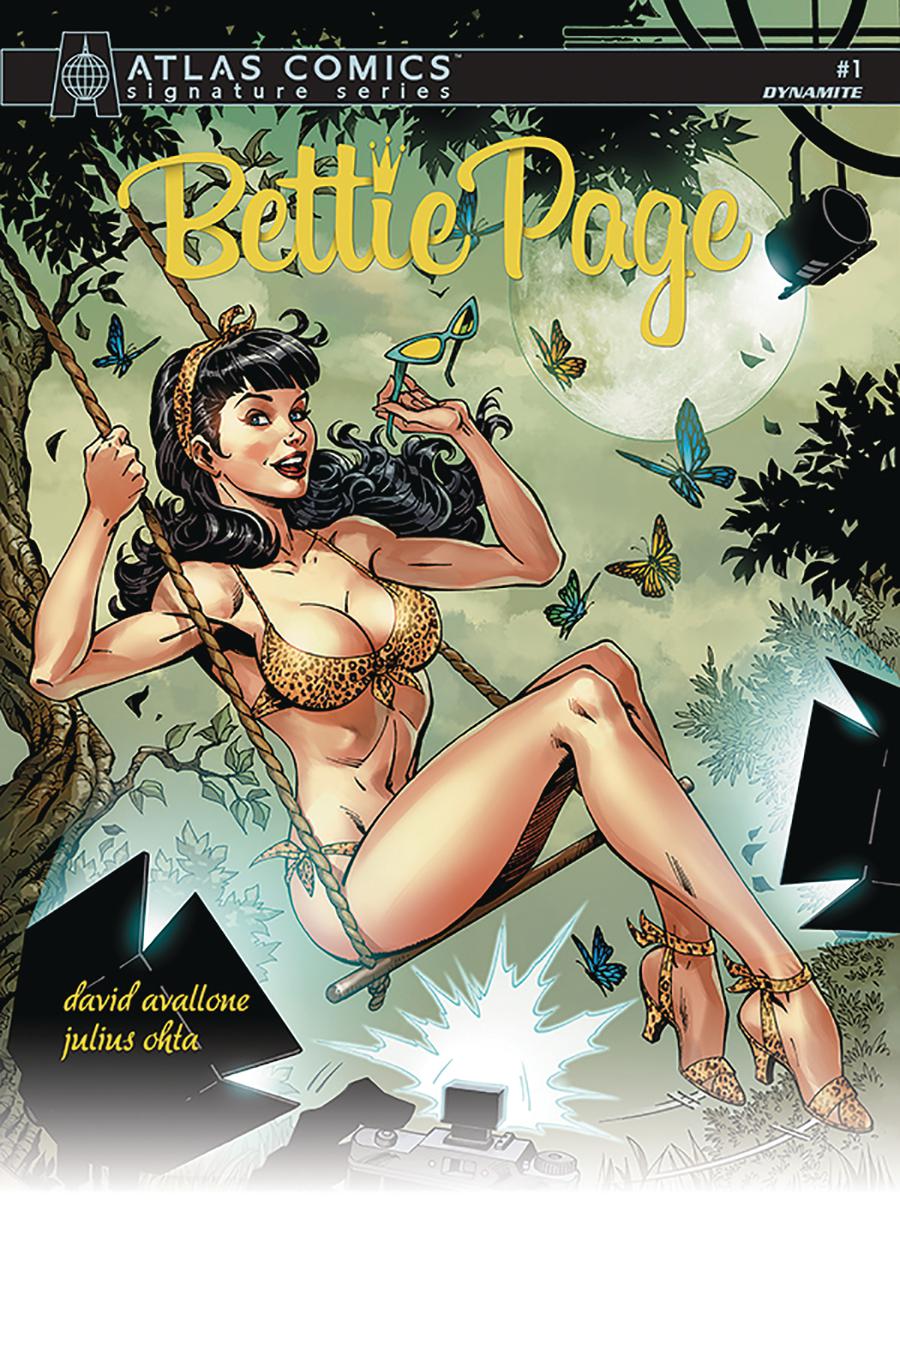 Bettie Page Vol 2 #1 Cover L Atlas Comics Signature Series Signed By David Avallone